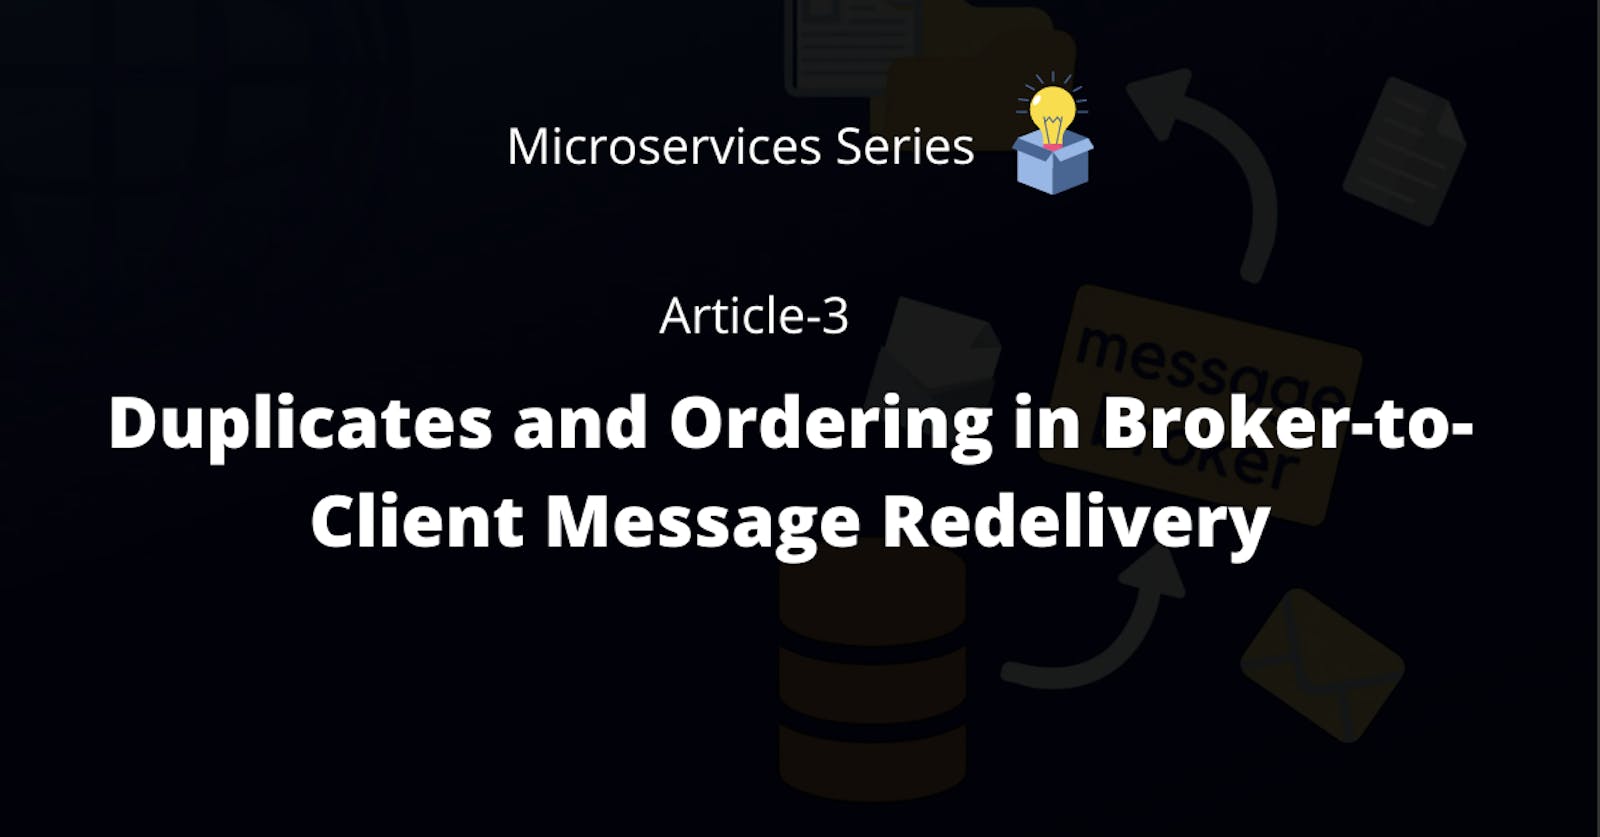 Duplicates and Ordering in Broker-to-Client Message Redelivery